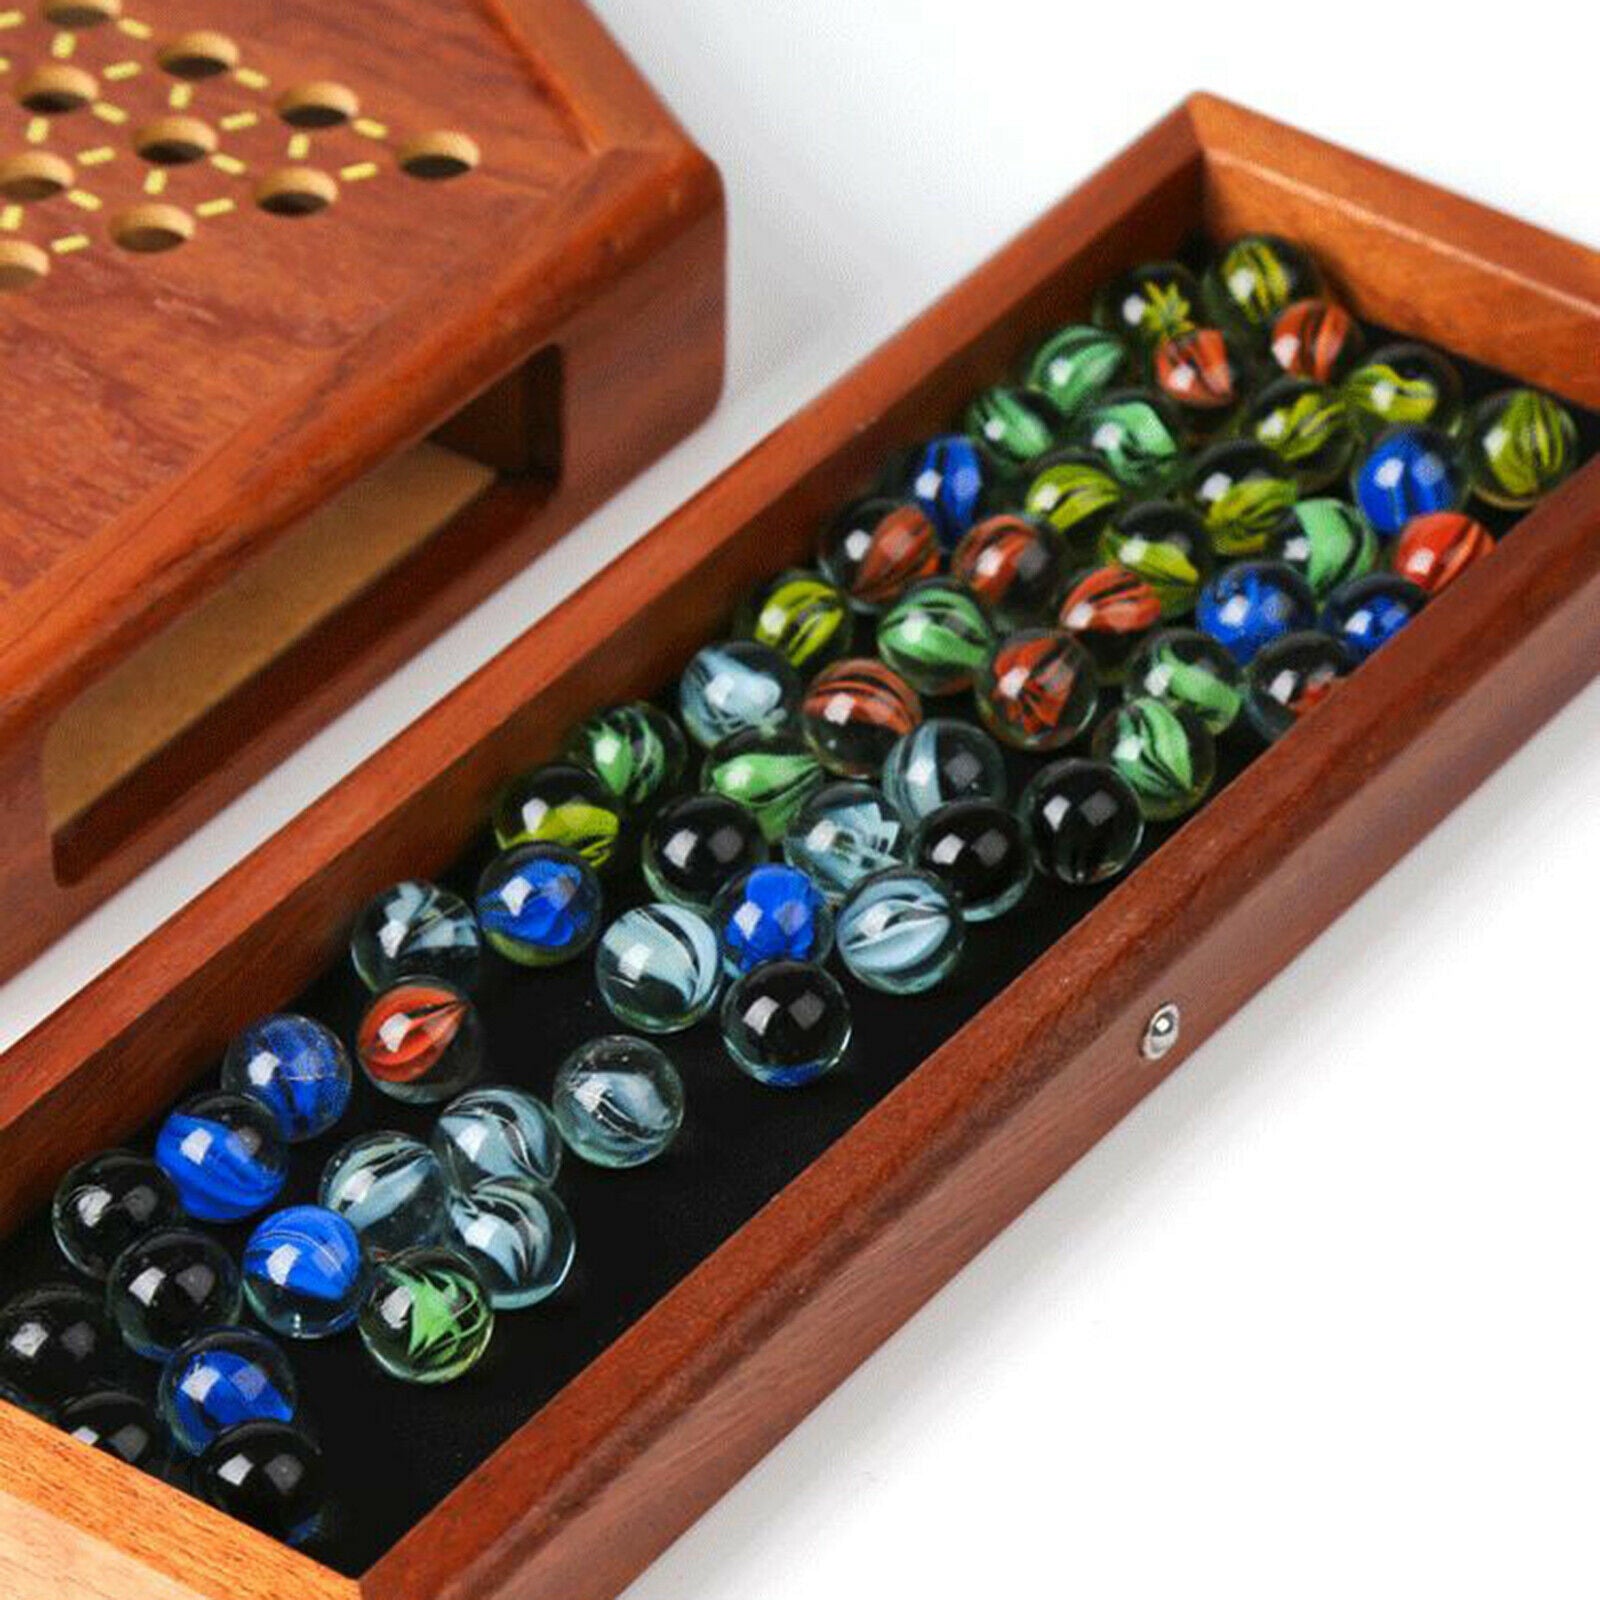 Chinese Checkers, Wooden Game Set, Built-in Storage Drawers, 6 Multi-Colored